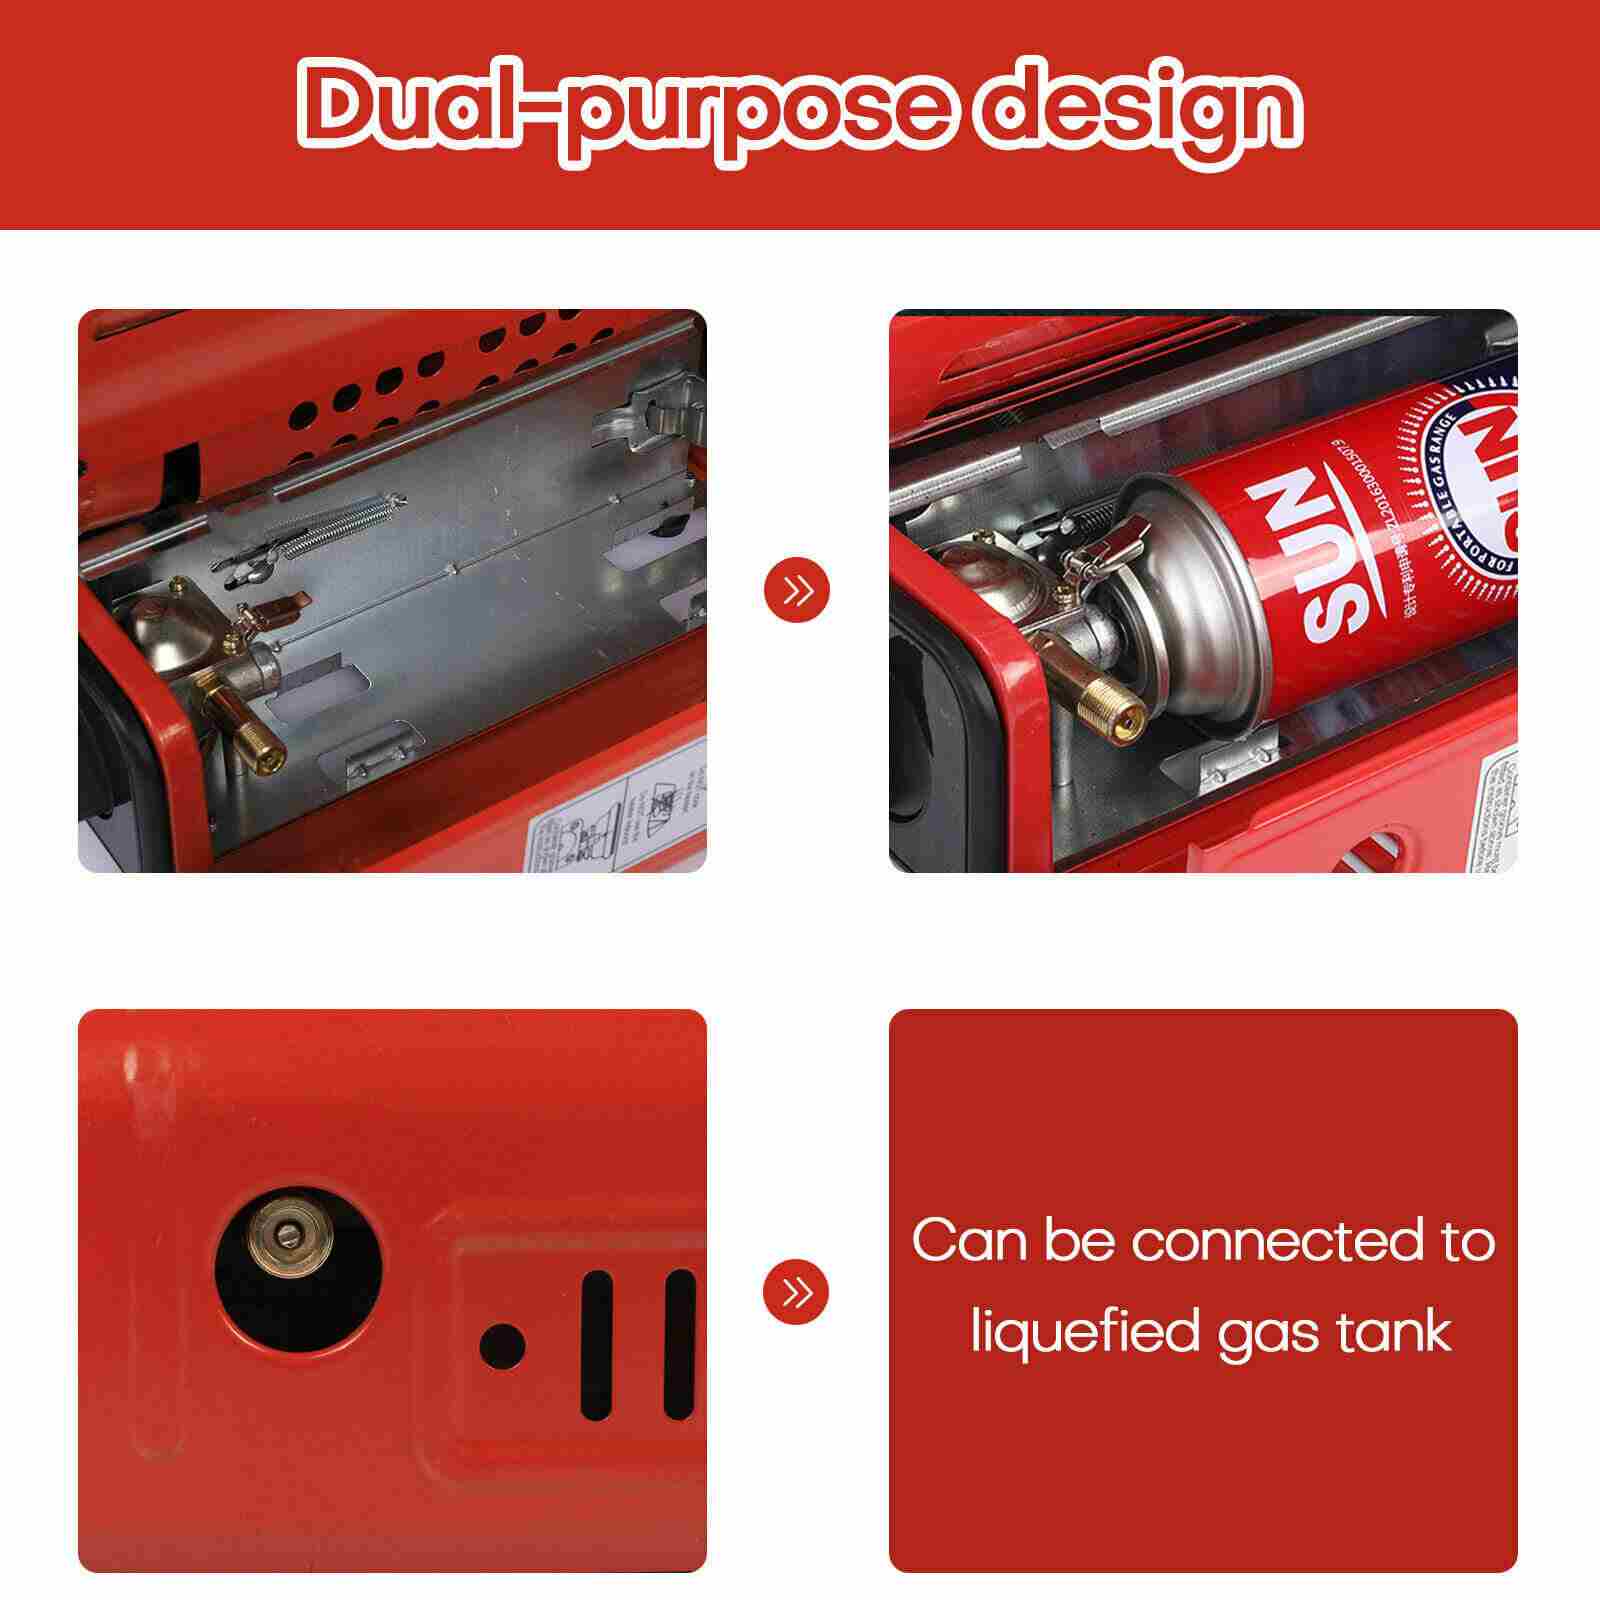 Special Design of Portable 2 in 1 GAS Butane Heater Camping Stove